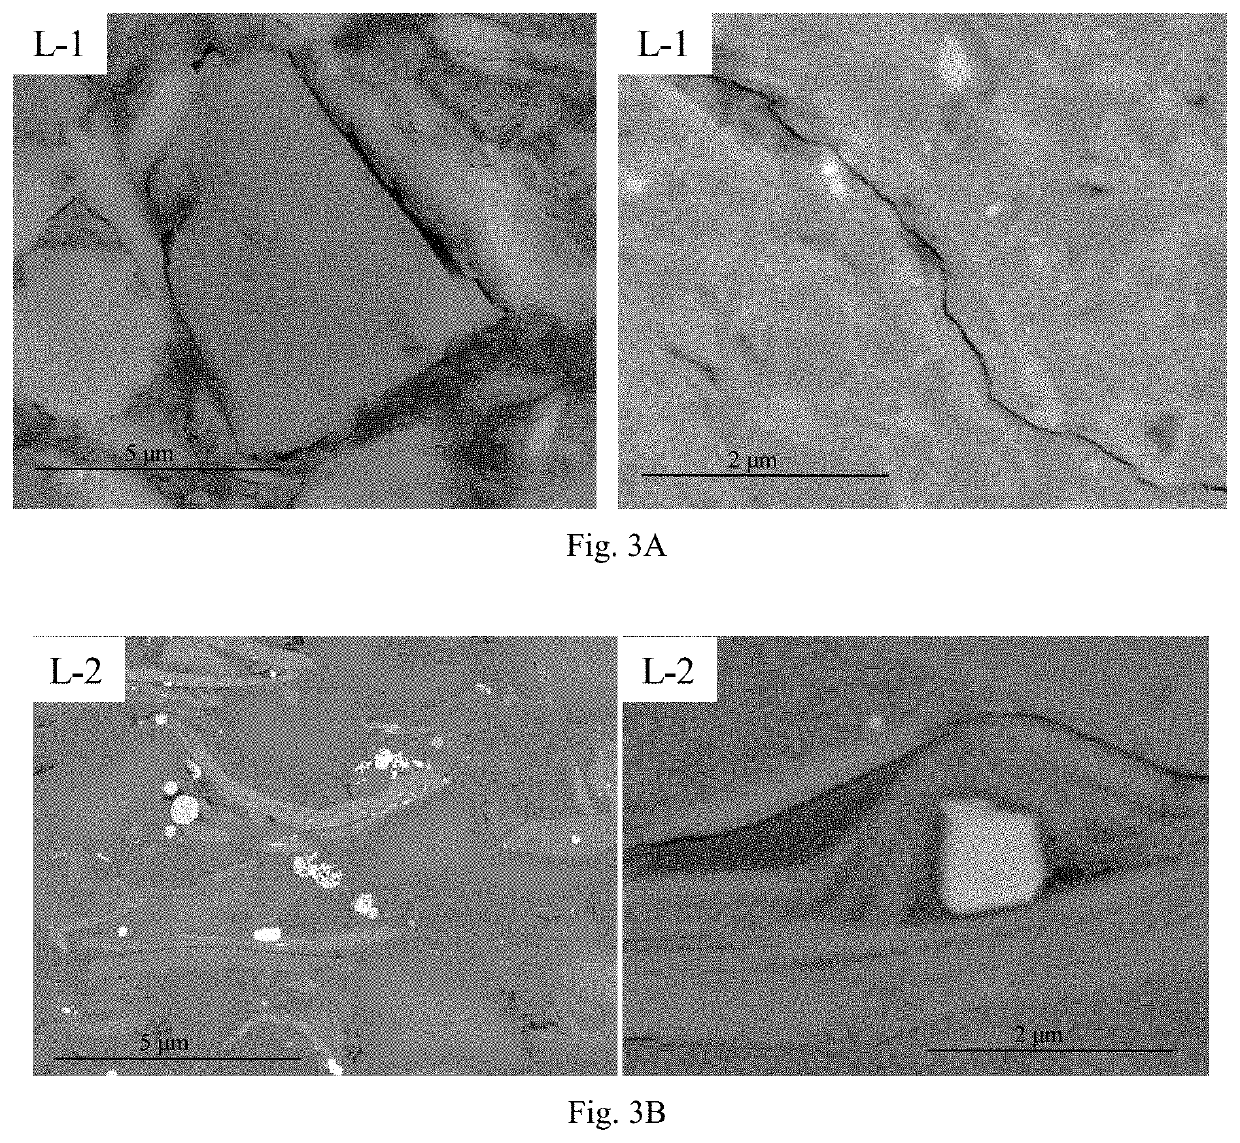 Experimental test method for subcritical propagation rate of rock fractures based on triaxial stress - strain curve